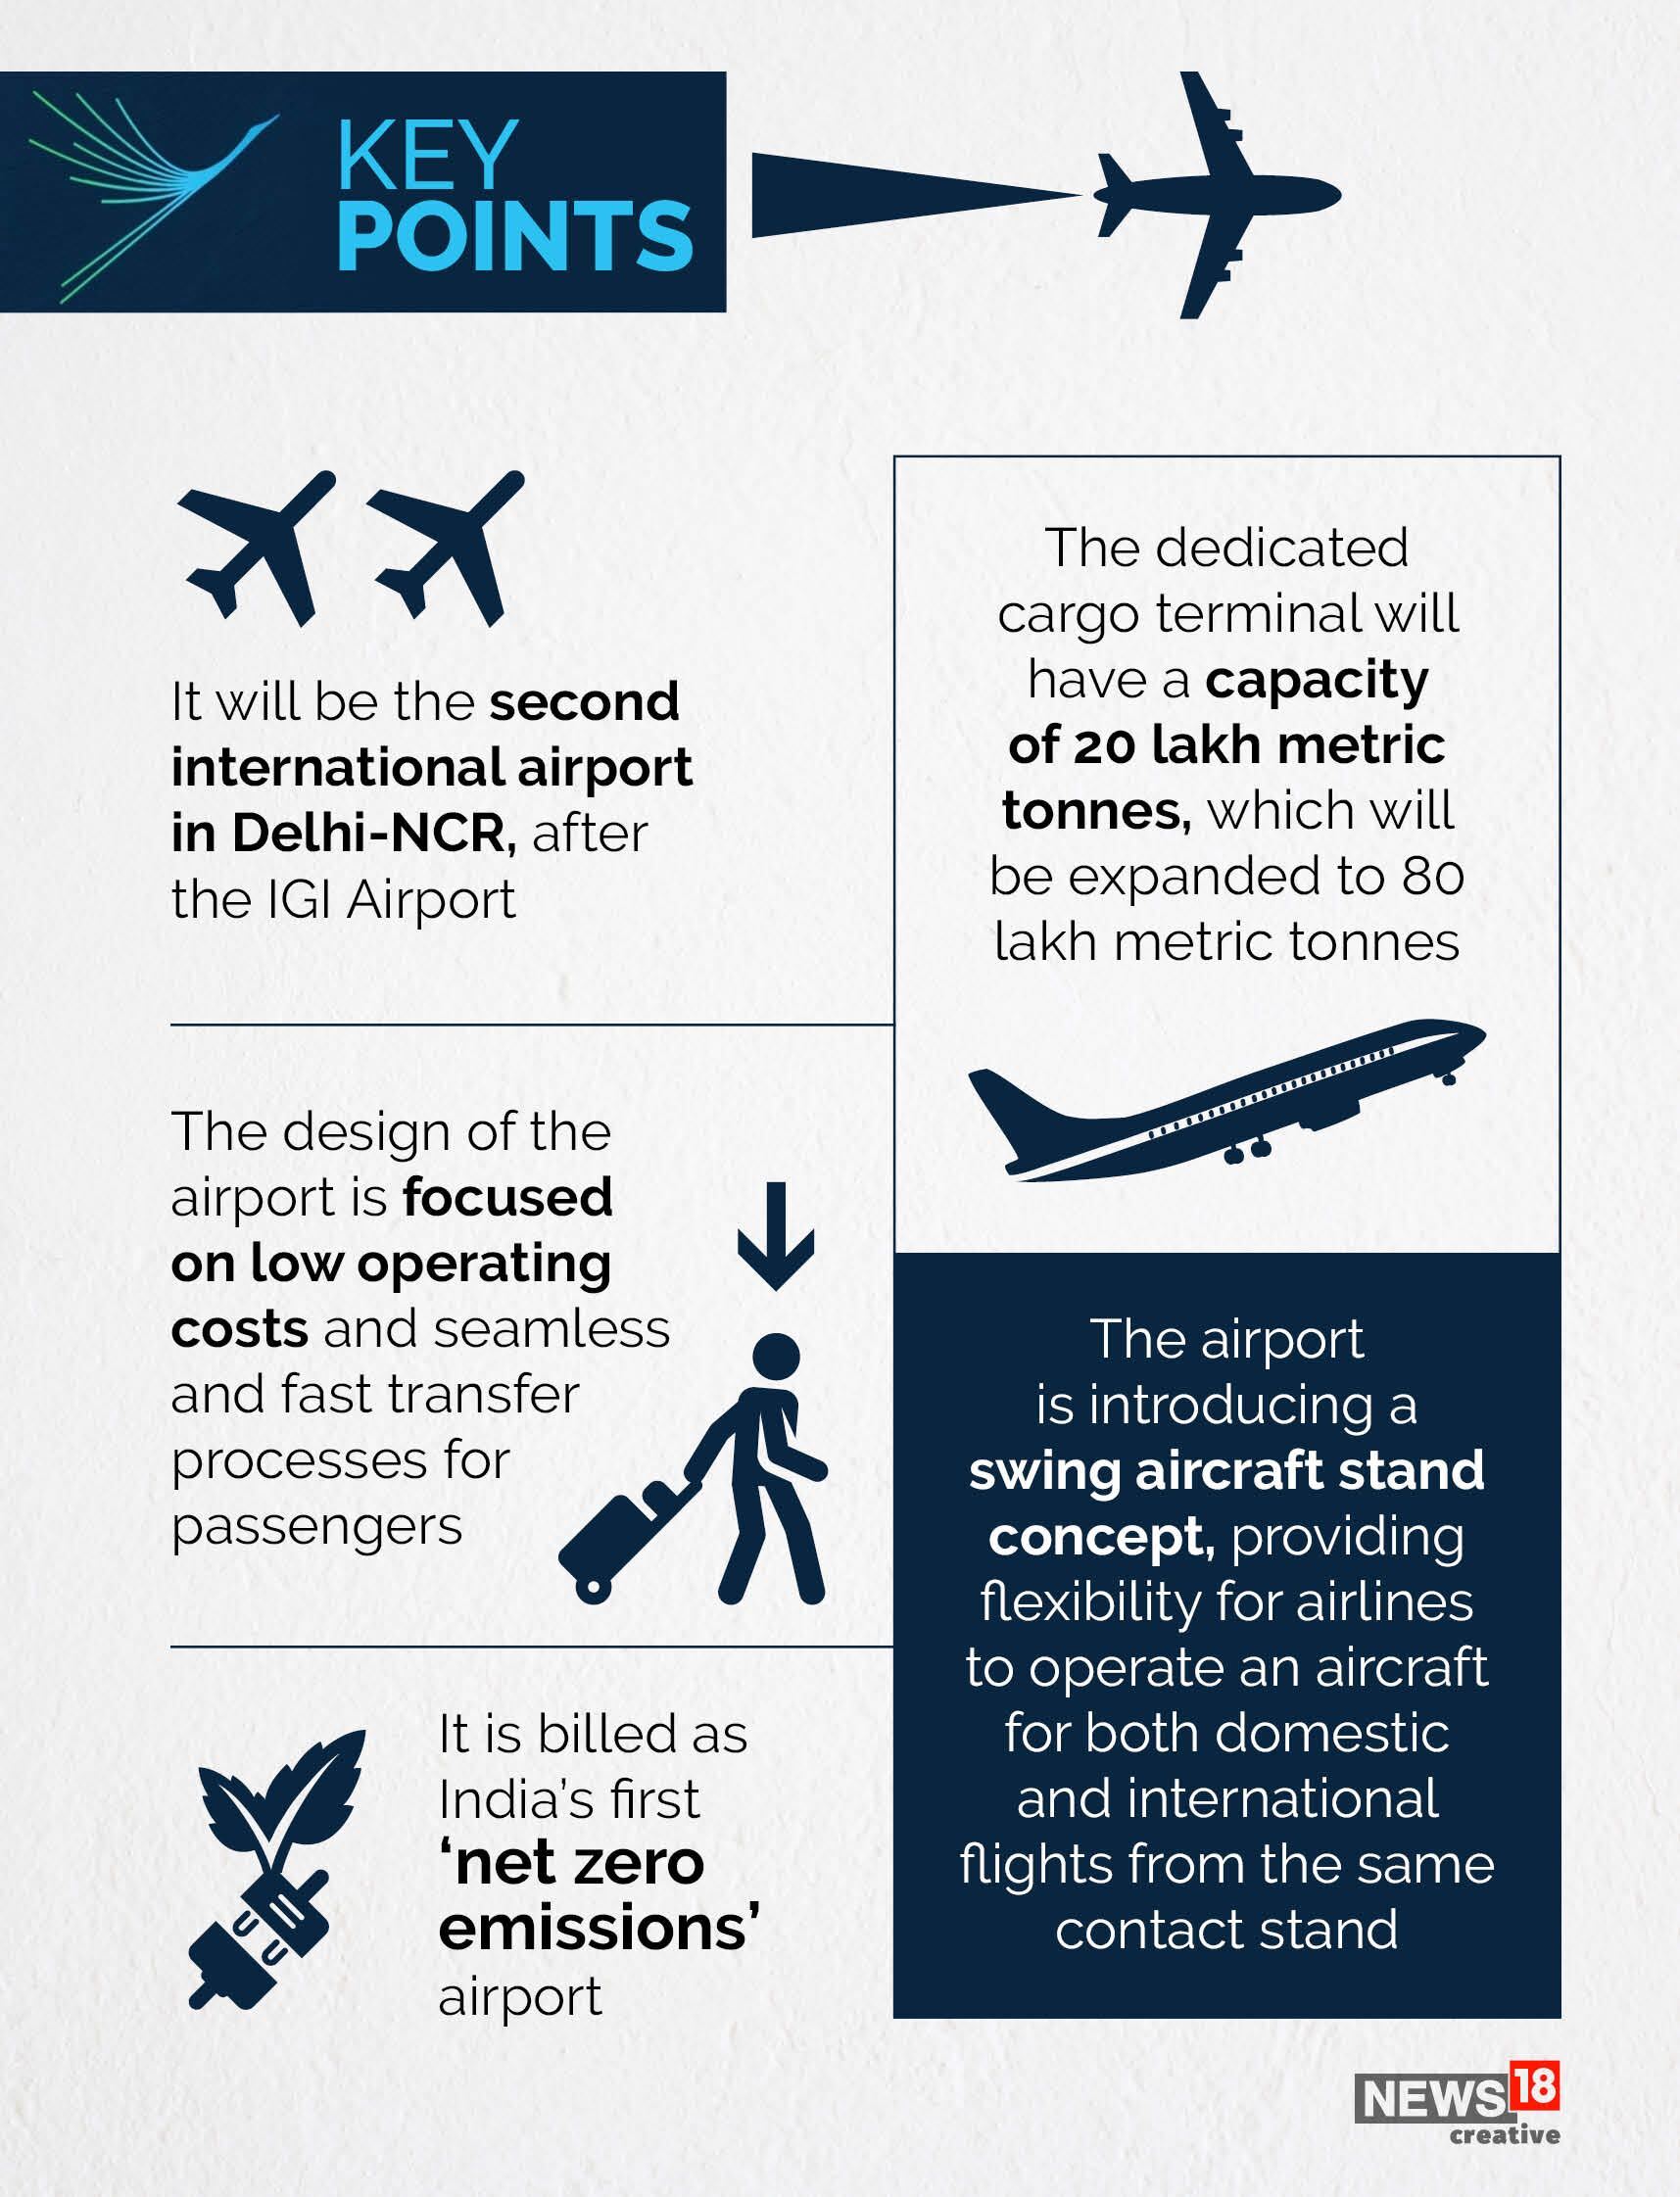 All you need to know about the Noida International Airport, Asia's largest airport when complete